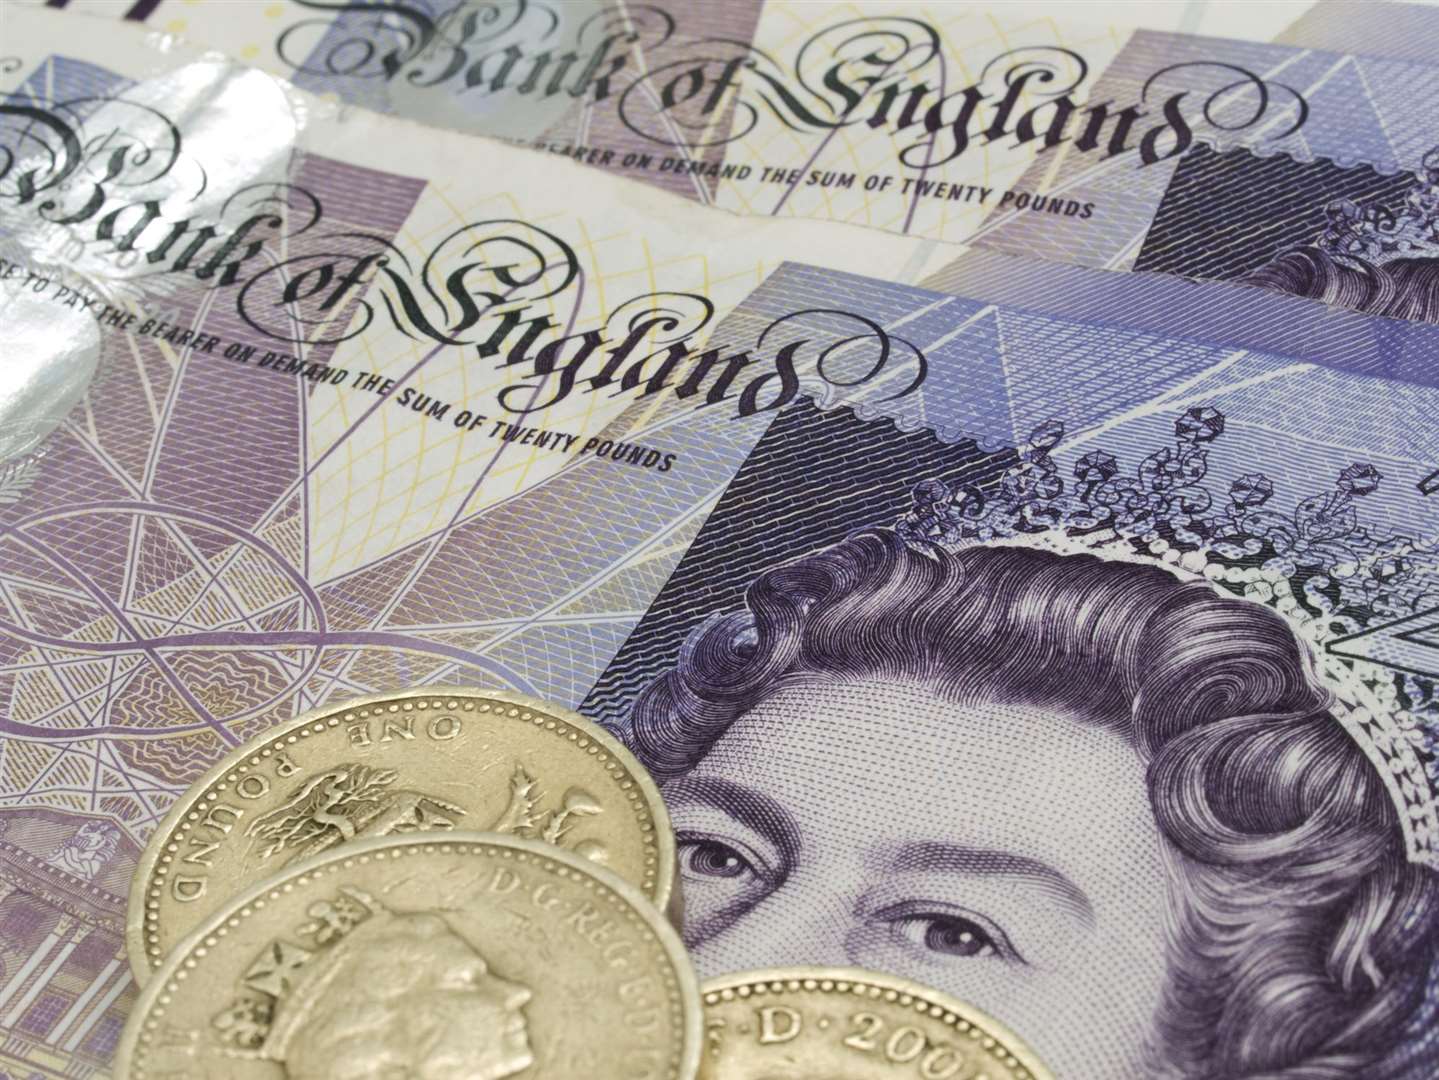 Signing up to a social tariff can save up to £180 a month says the DWP. Image: Stock photo.